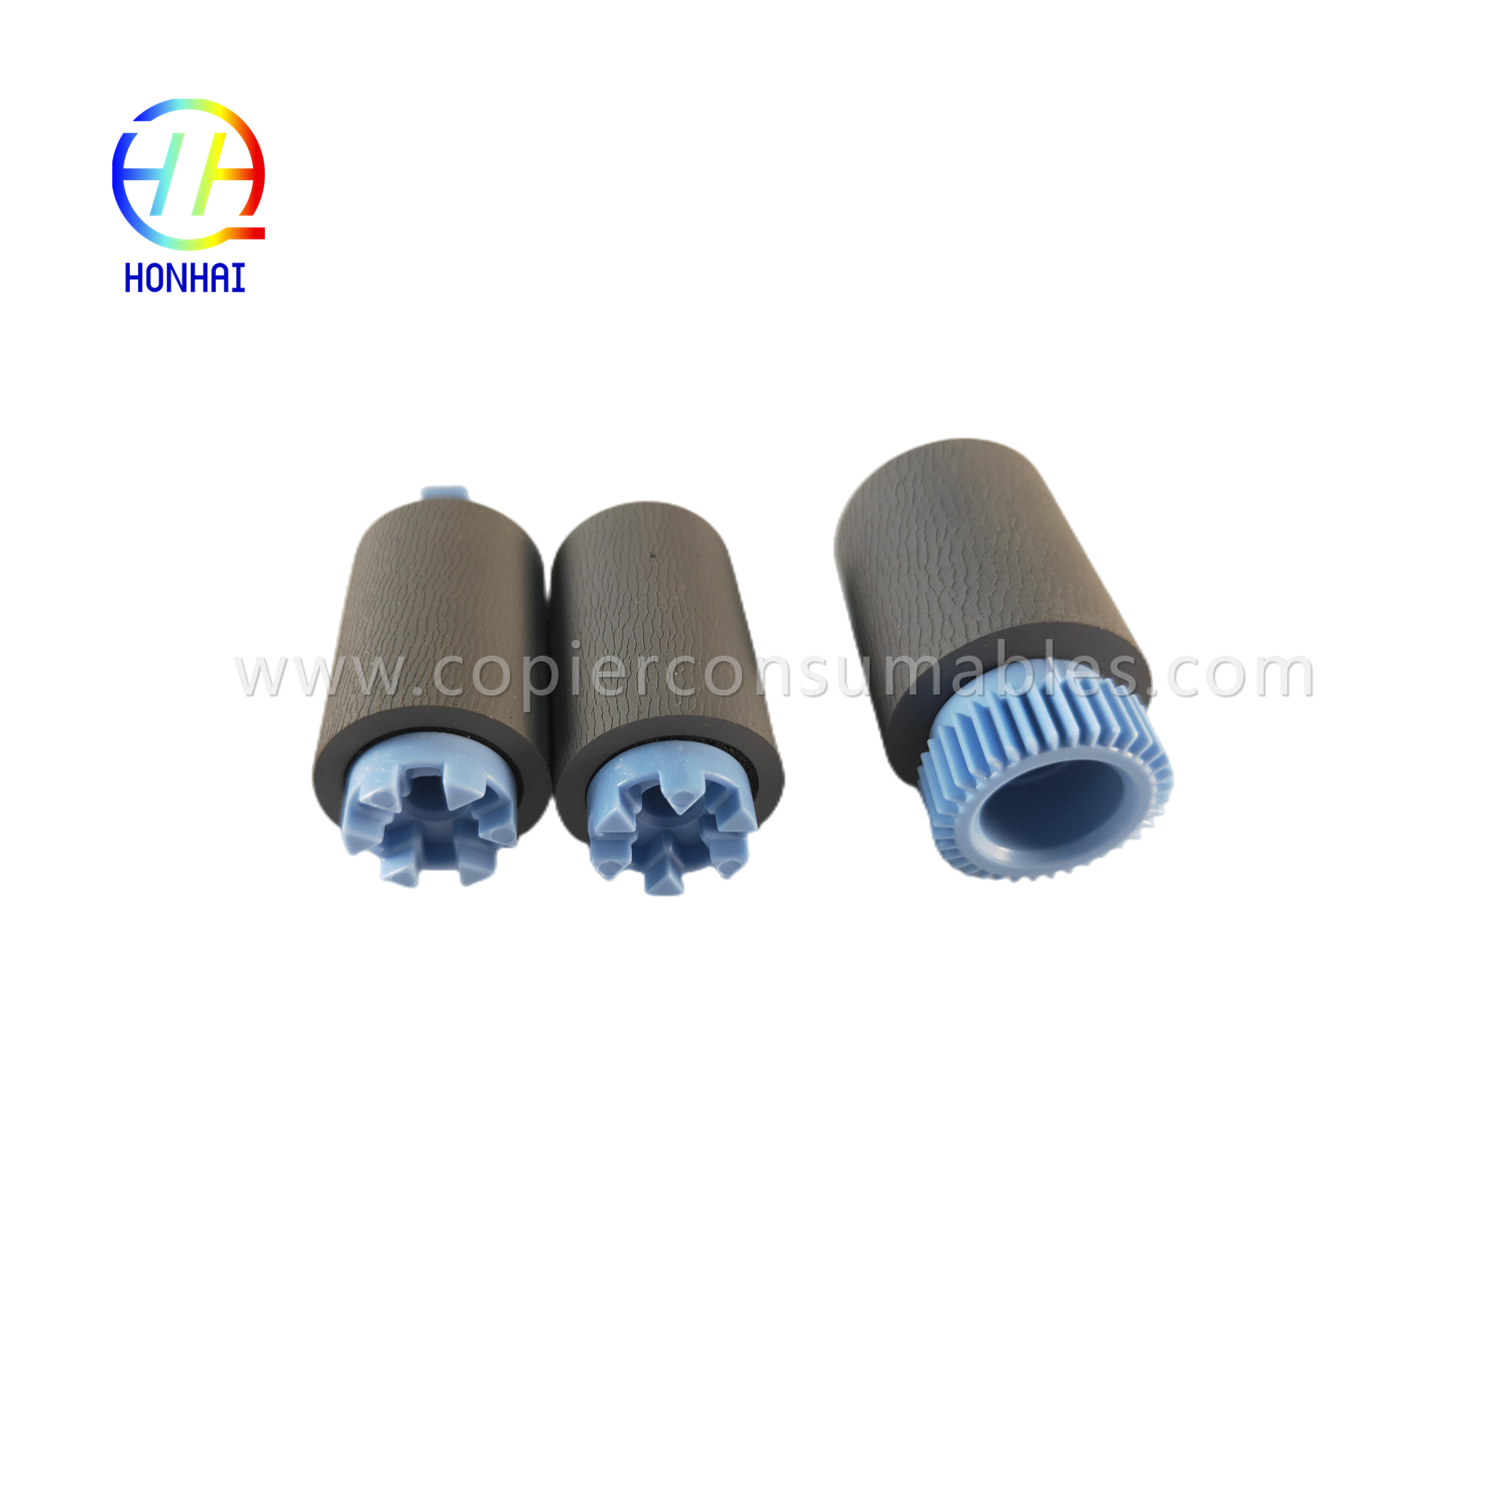 https://www.copierconsumables.com/tray-2-5-pickup-feed-separation-roller-set-for-hp-a7w93-67082-mfp-785f-780dn-e77650z-e77660z-e77650dn-607dn-707d p77750z-p77760z-p75050dn-p75050dw-product/